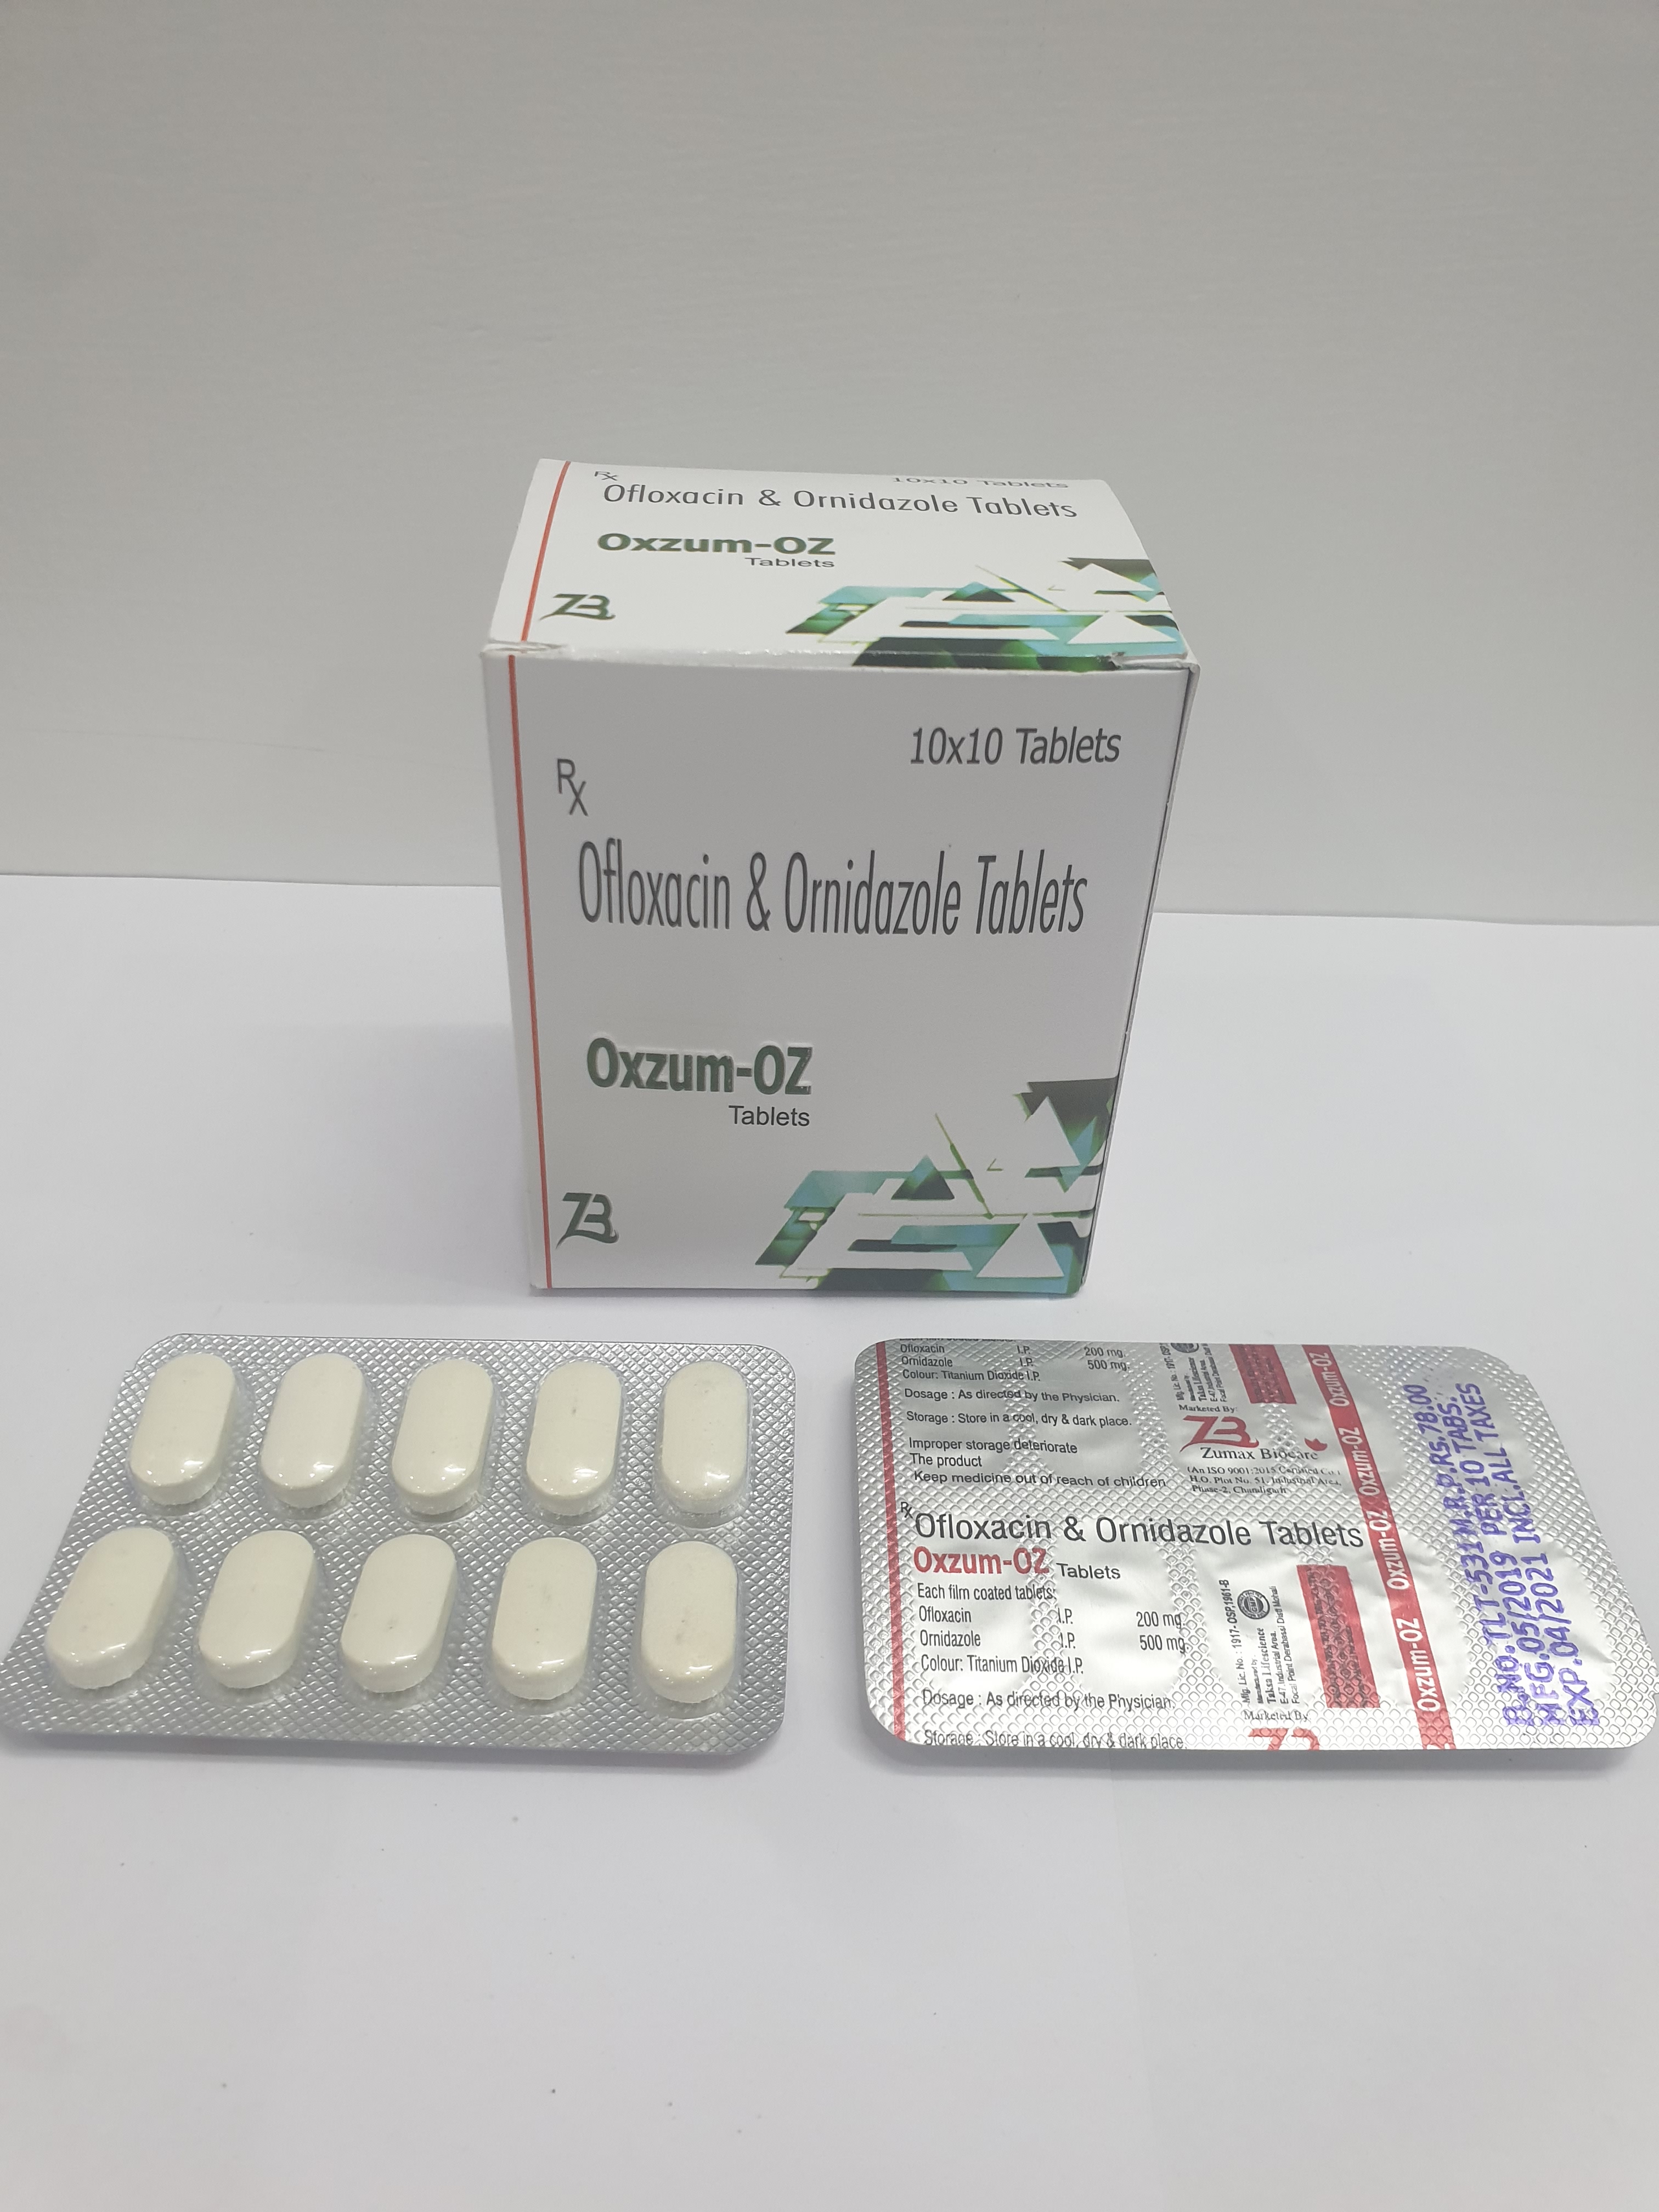 Product Name: Oxzum OZ, Compositions of Ofloxacin & Ornidazole Tablets are Ofloxacin & Ornidazole Tablets - Zumax Biocare